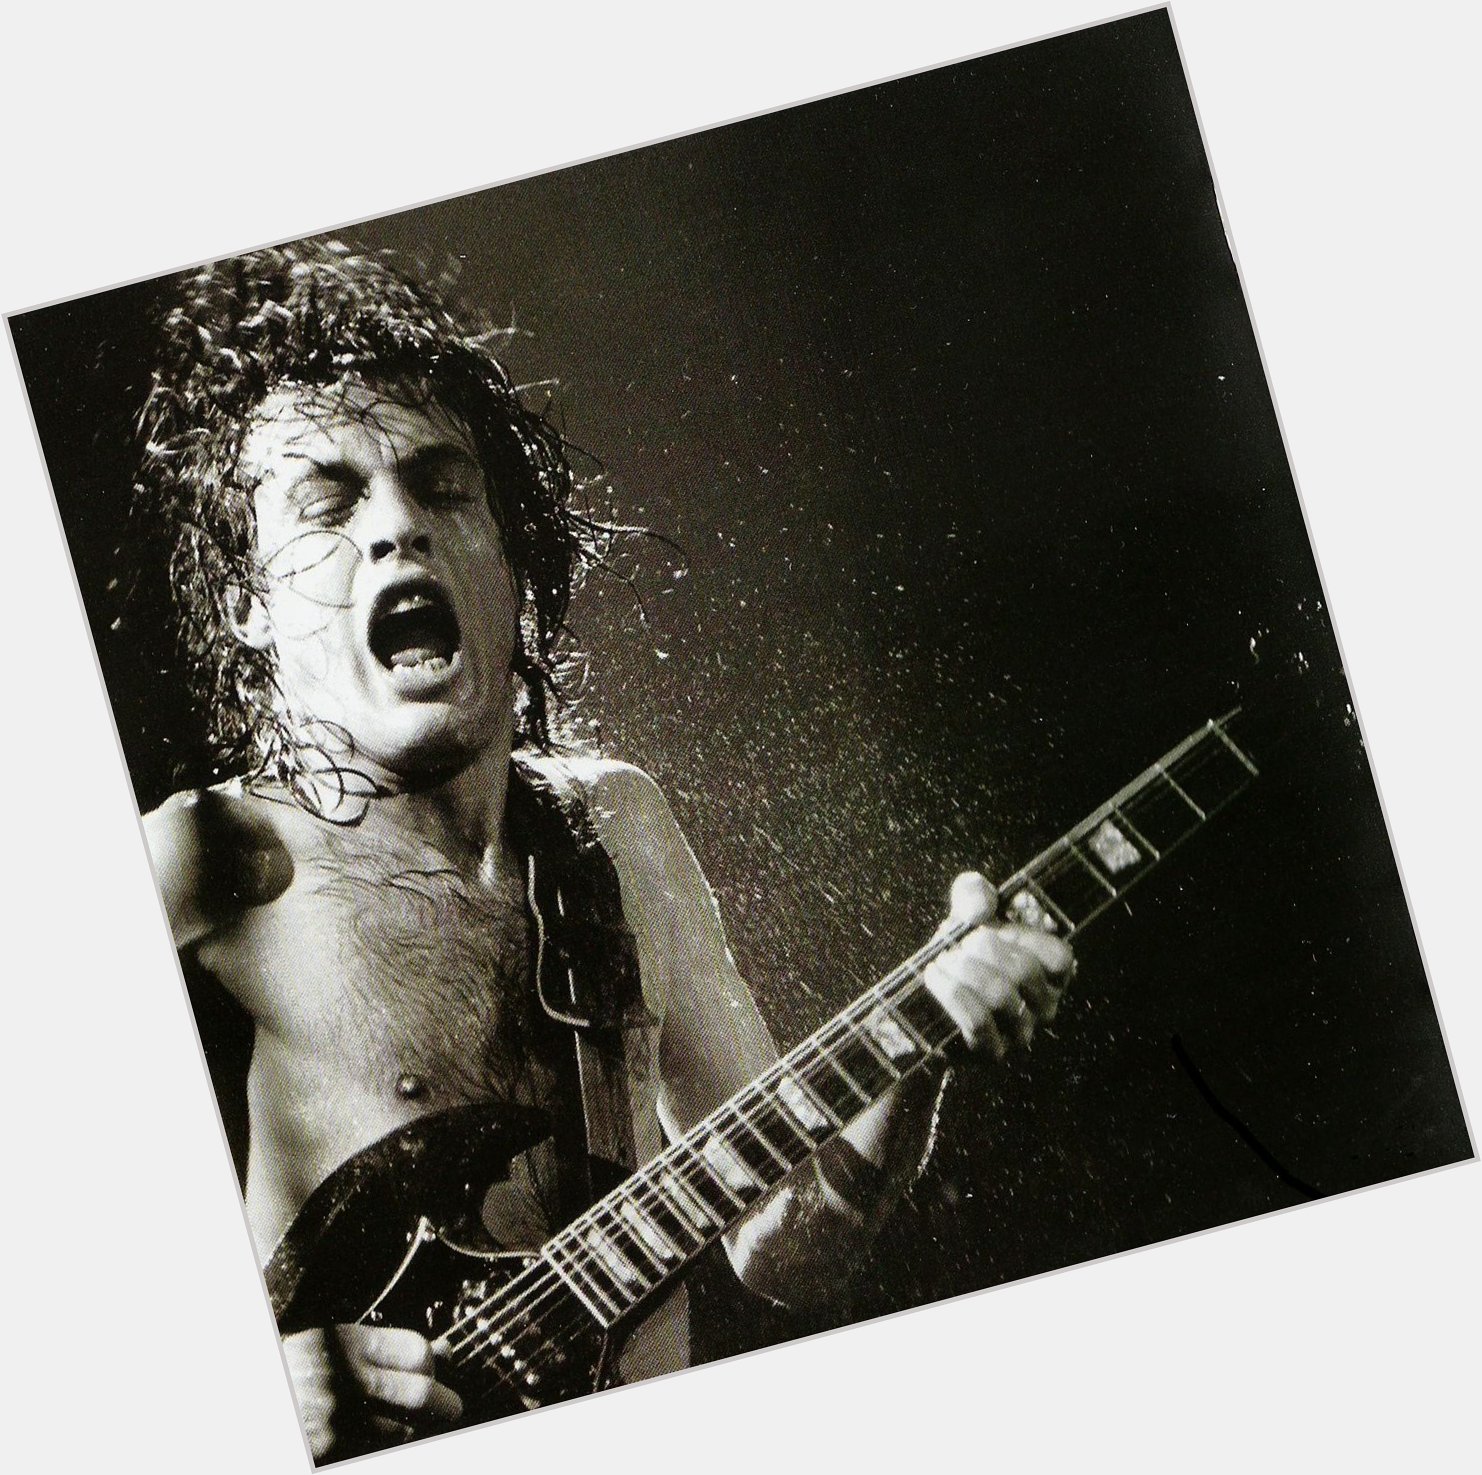 Happy birthday Angus Young, Scottish-born Australian guitarist with AC/DC, born on 31st March 1955. 